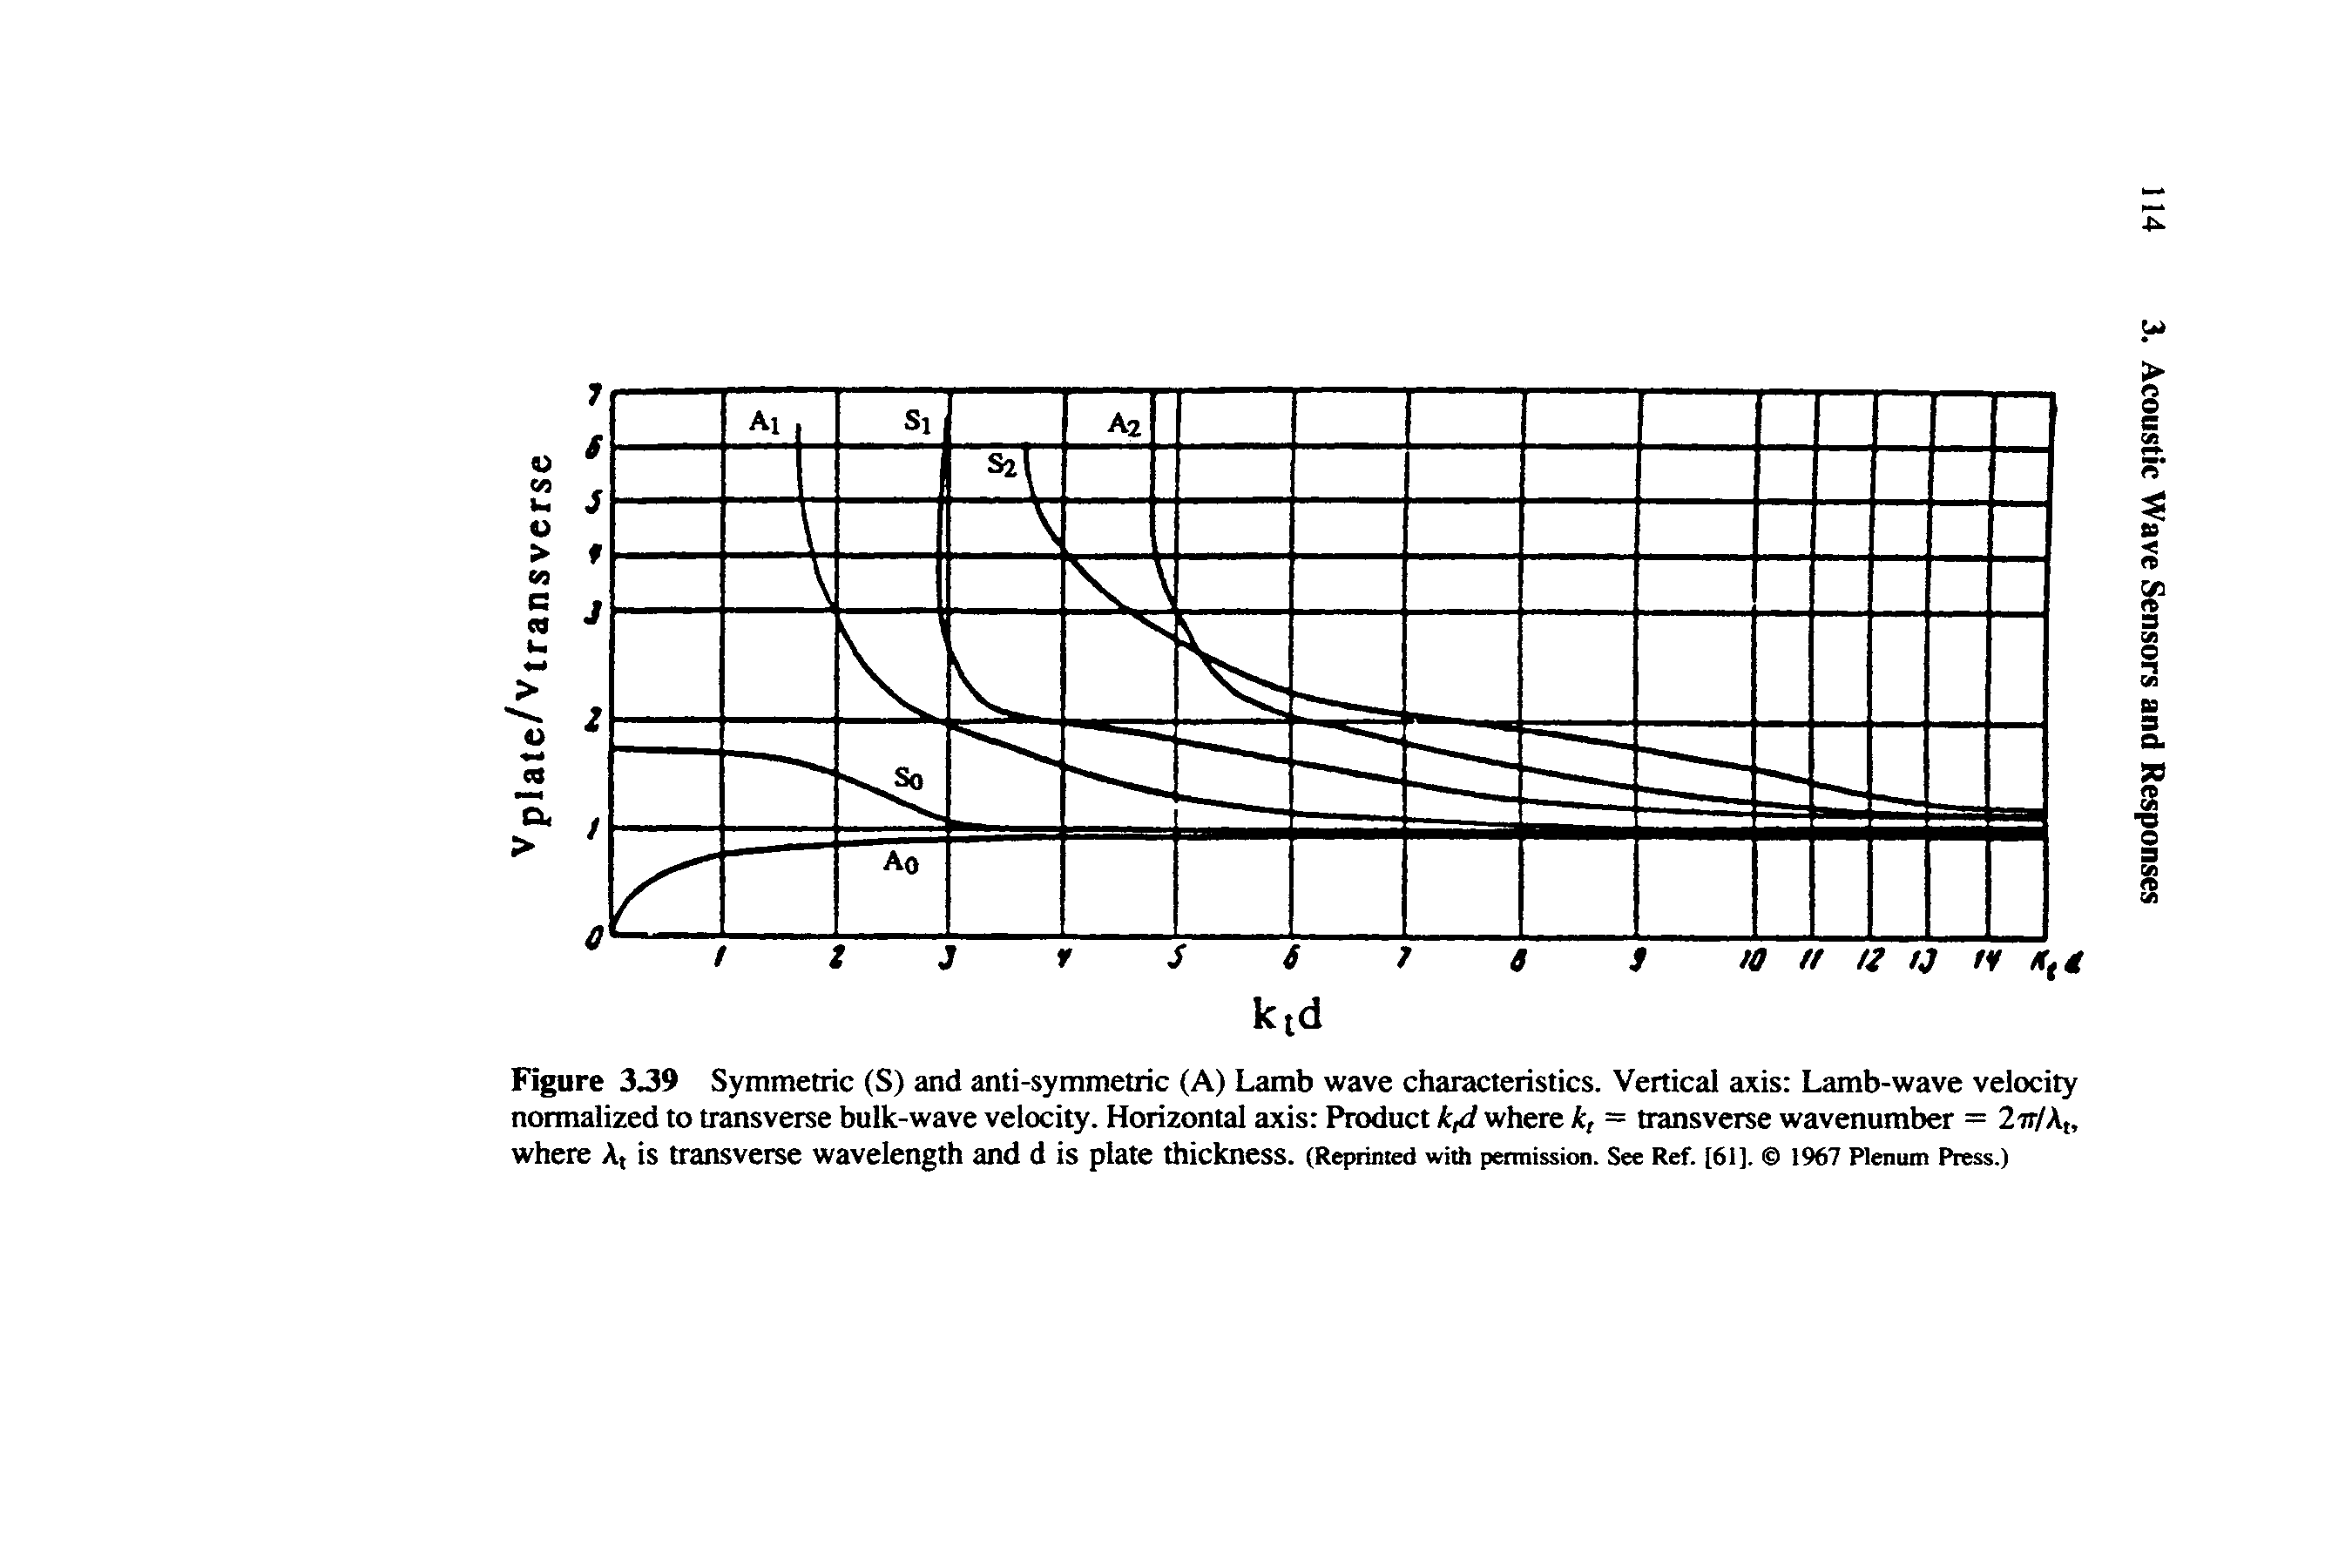 Figure 339 Symmetric (S) and anti-symmetric (A) Lamb wave characteristics. Vertical axis Lamb-wave velocity normalized to transverse bulk-wave velocity. Horizontal axis Product k4 where kt = transverse wavenumber = 27r/At, where At is transverse wavelength and d is plate thickness. (Reprimed with permission. See Ref. [61]. 1967 Plenum Press.)...